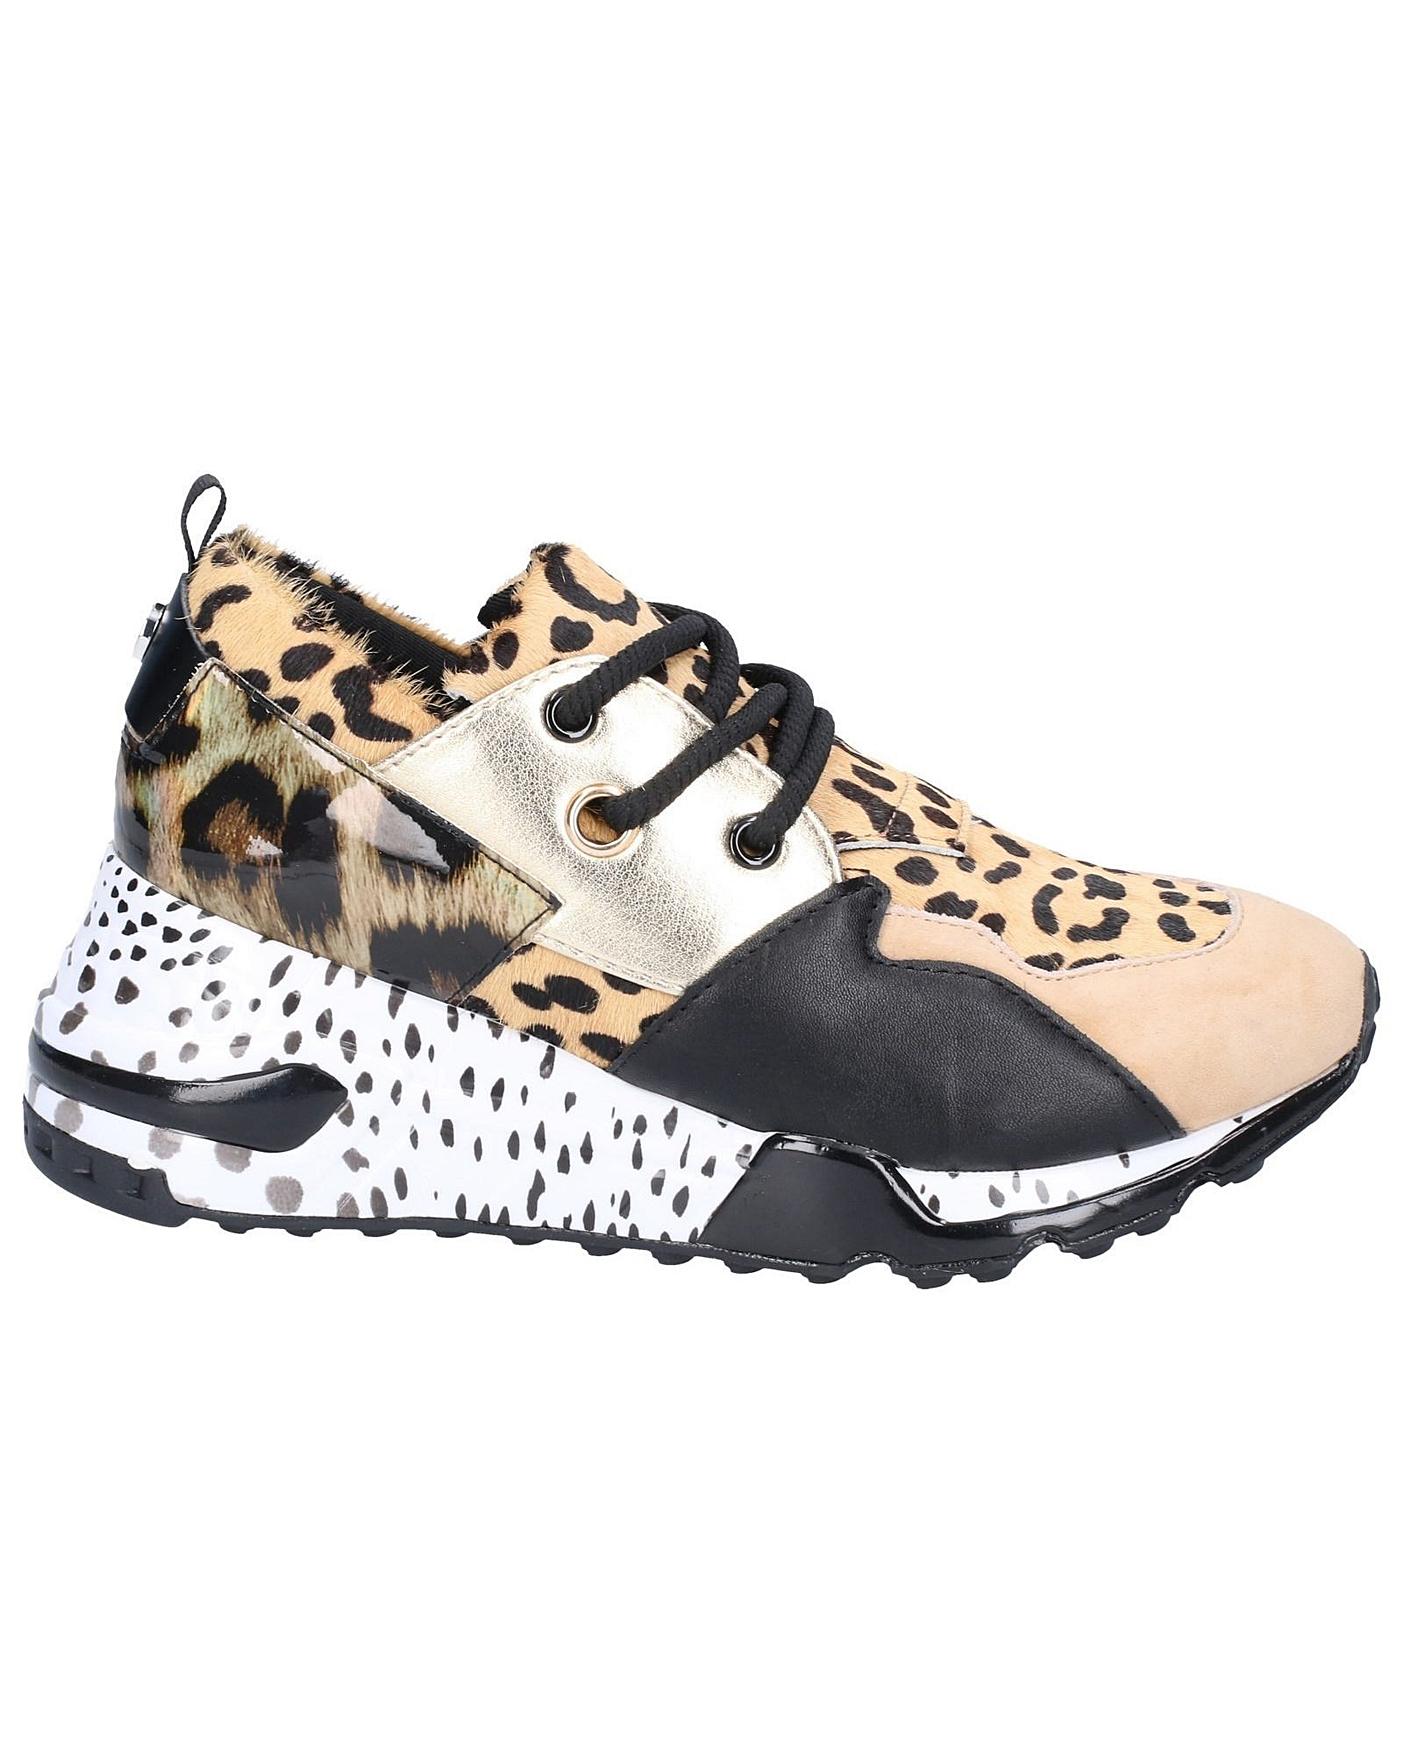 Steve Madden Cliff Lace Up Trainer 